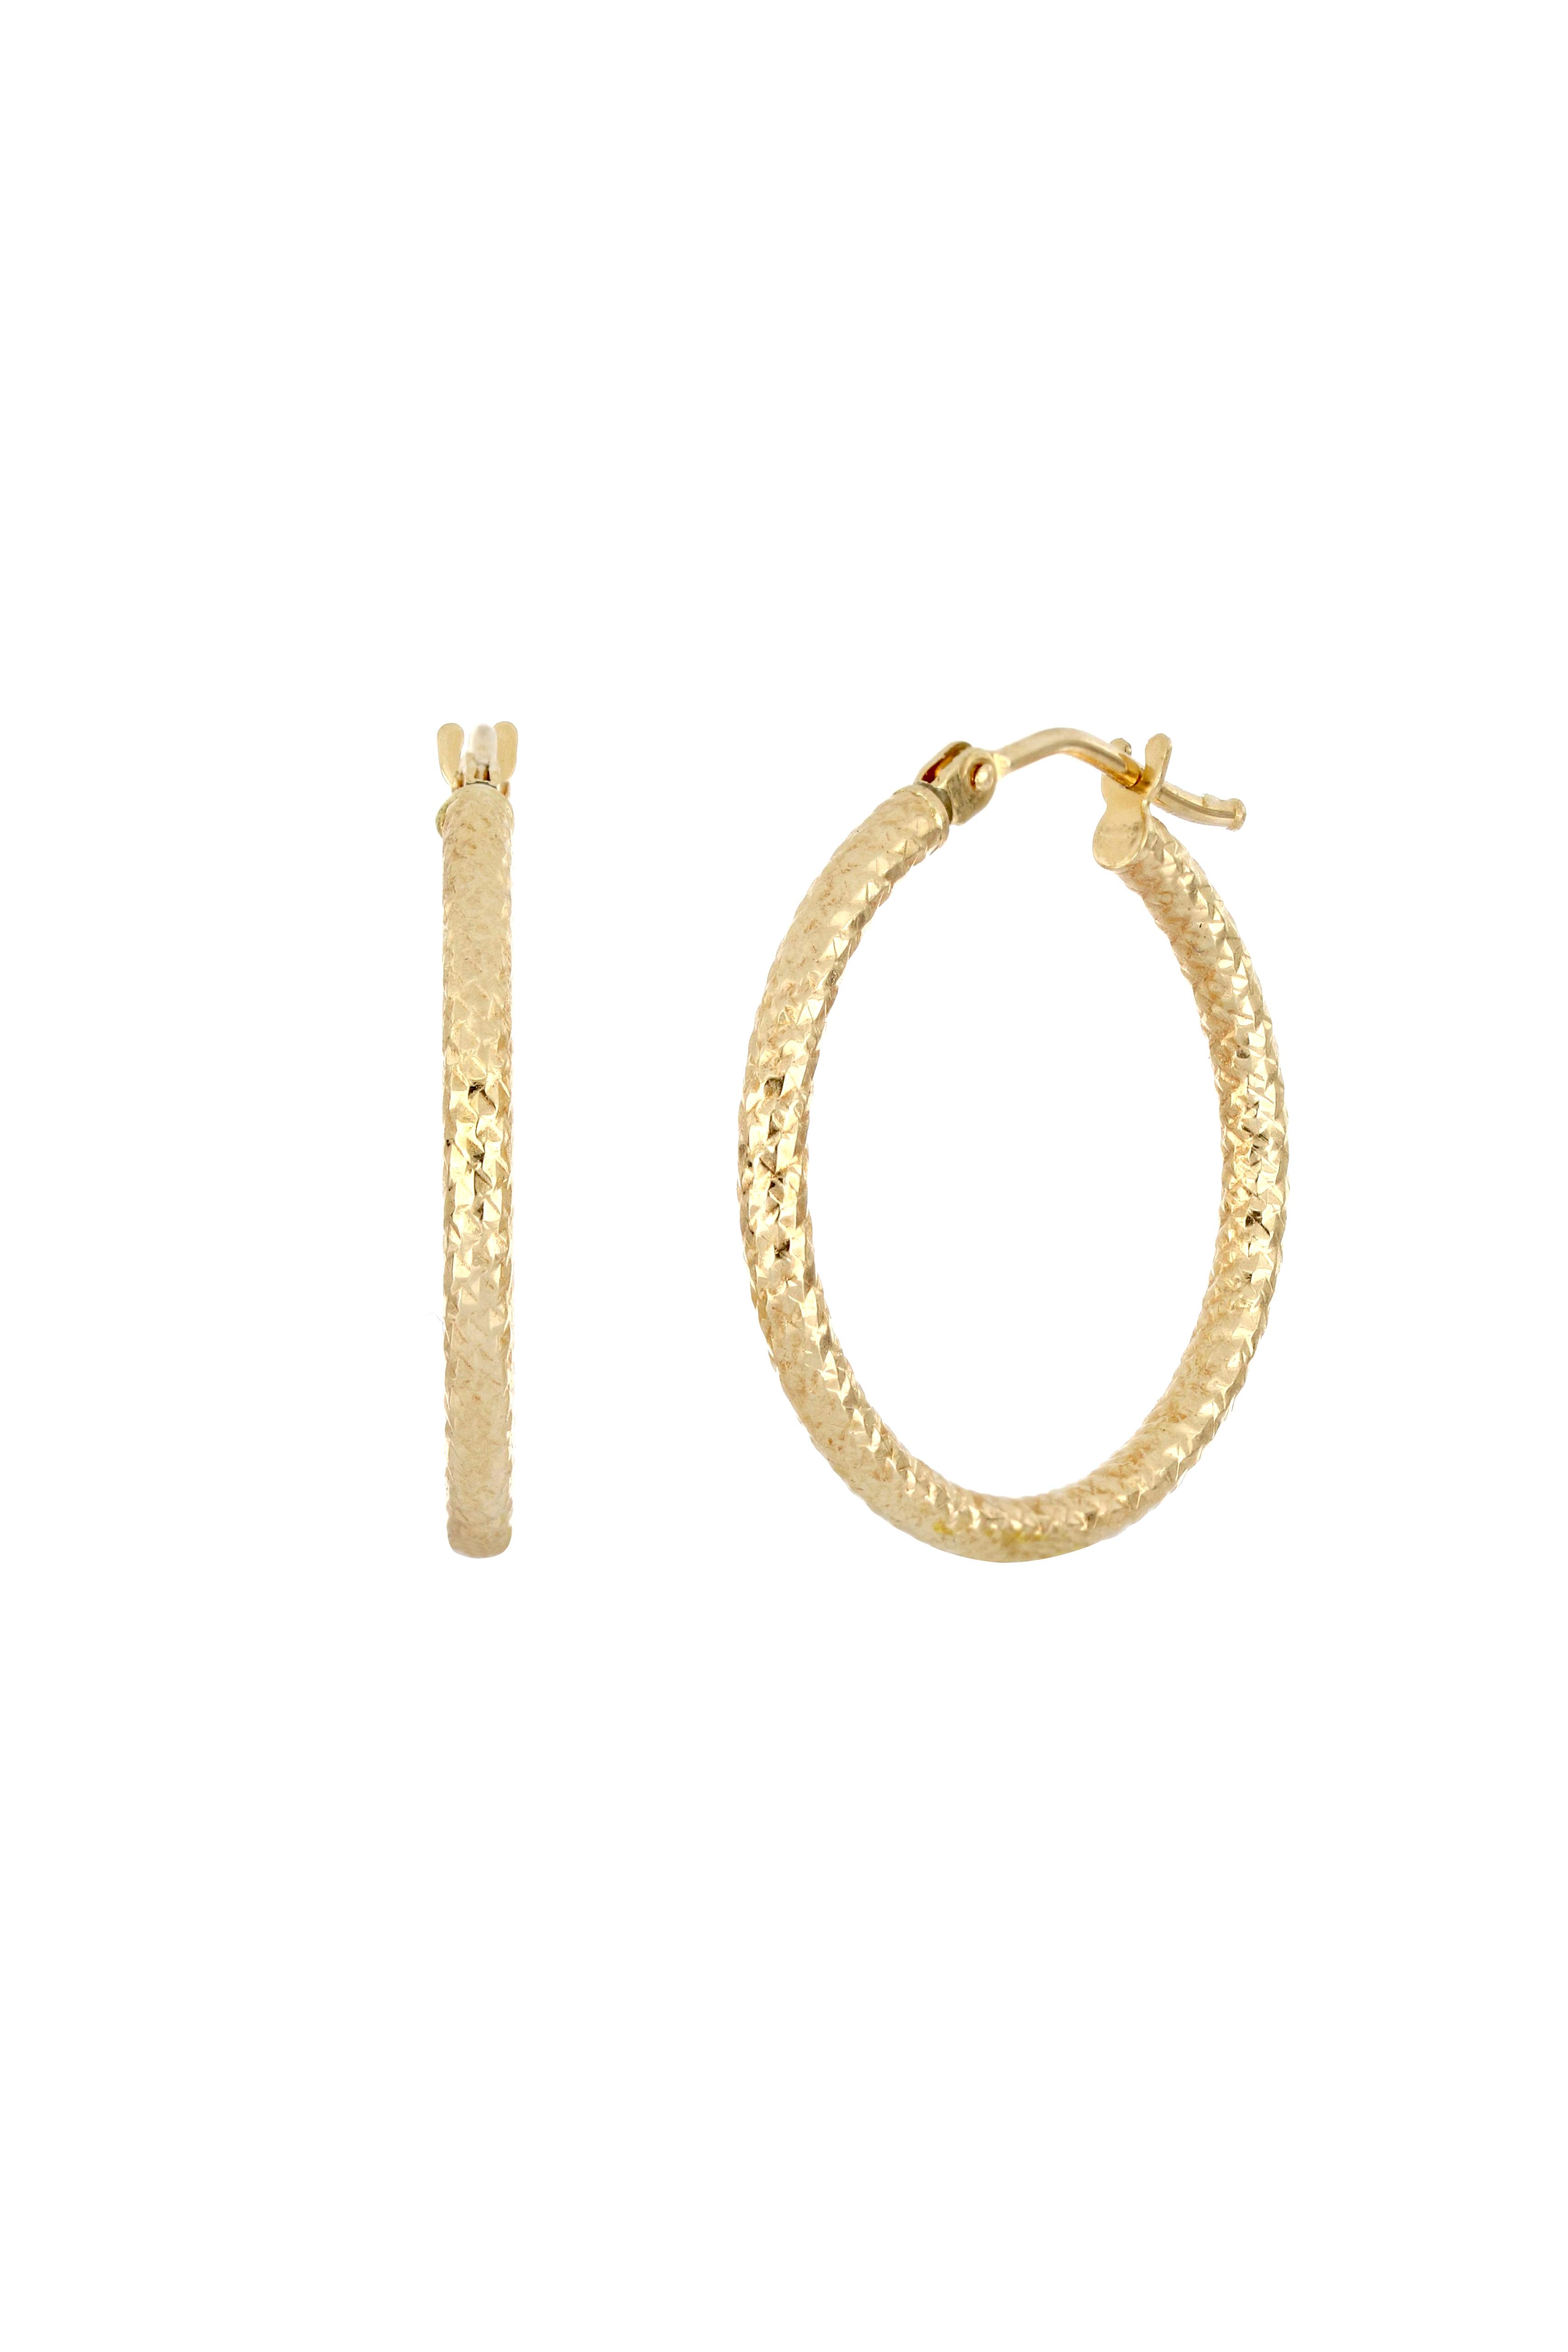 Golden Round Hoop Earrings for Women and Girls – Hello Cosmos